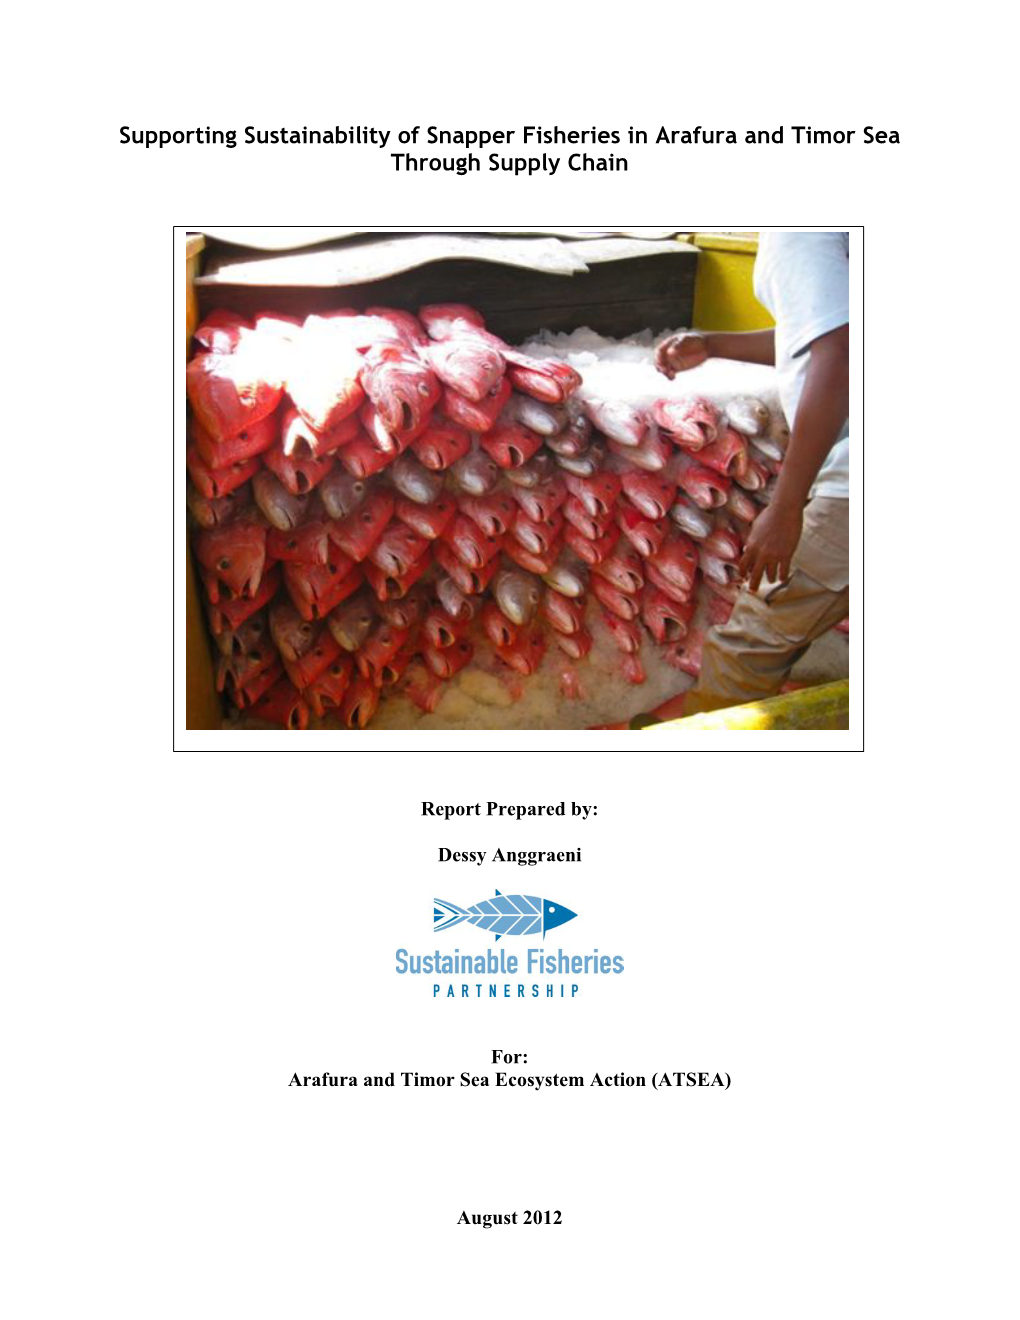 Supporting Sustainability of Snapper Fisheries in Arafura and Timor Sea Through Supply Chain